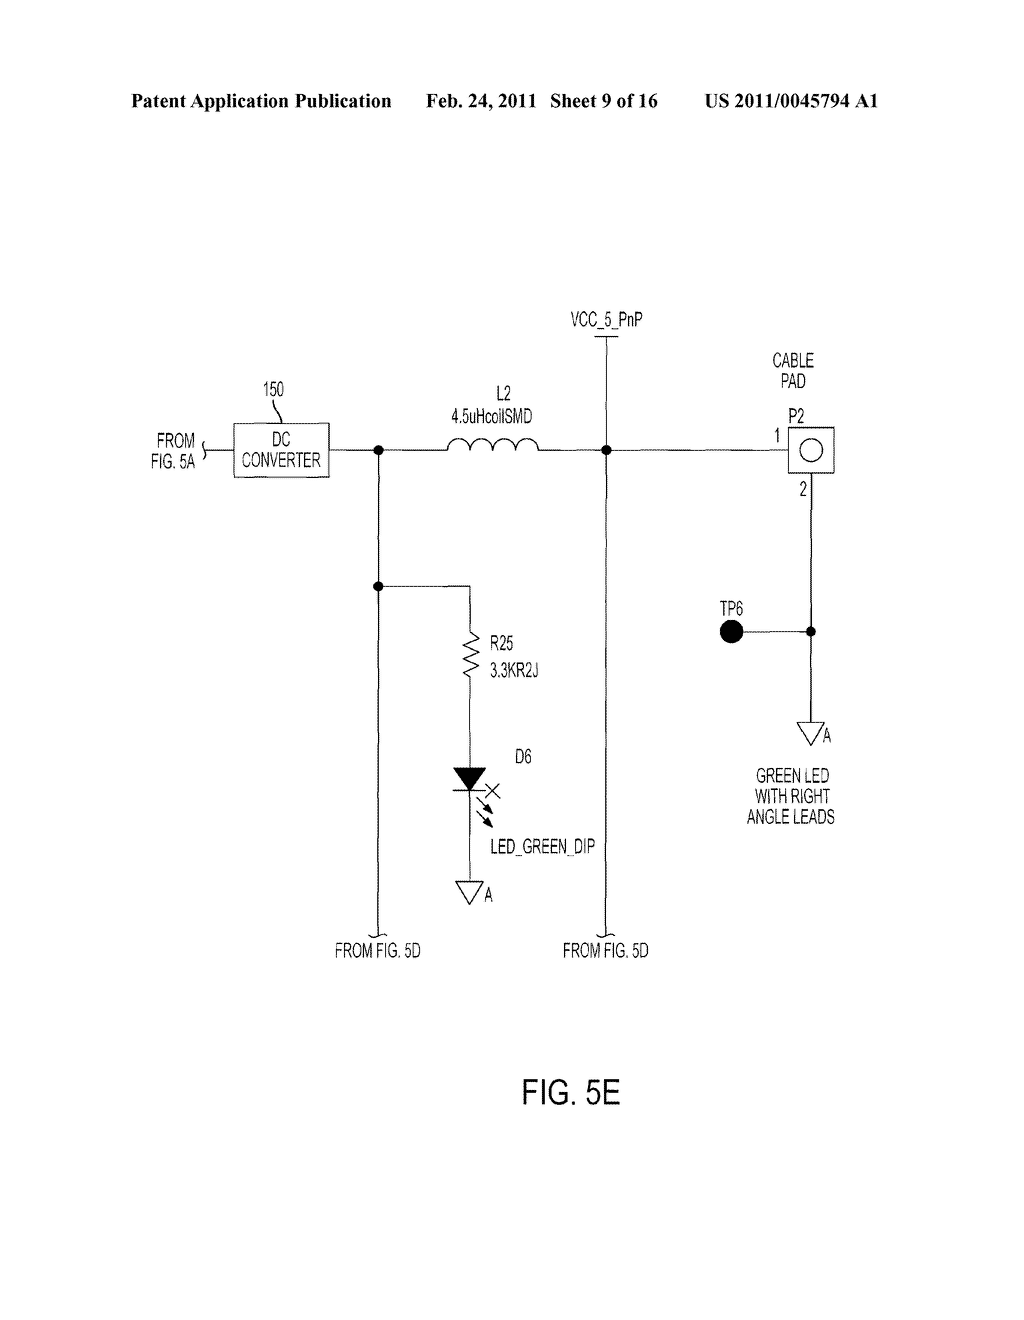 DOCKING UNIT AND VEHICLE POWER ADAPTER WITH FREQUENCY MODULATED AUDIO SIGNAL INJECTION FOR CONNECTING PORTABLE MEDIA PLAYER AND/OR COMMUNICATIONS DEVICE TO VEHICLE FM RADIO AND AUDIO SYSTEM FOR PLAYBACK OF DIGITAL AUDIO BROADCAST STREAM - diagram, schematic, and image 10